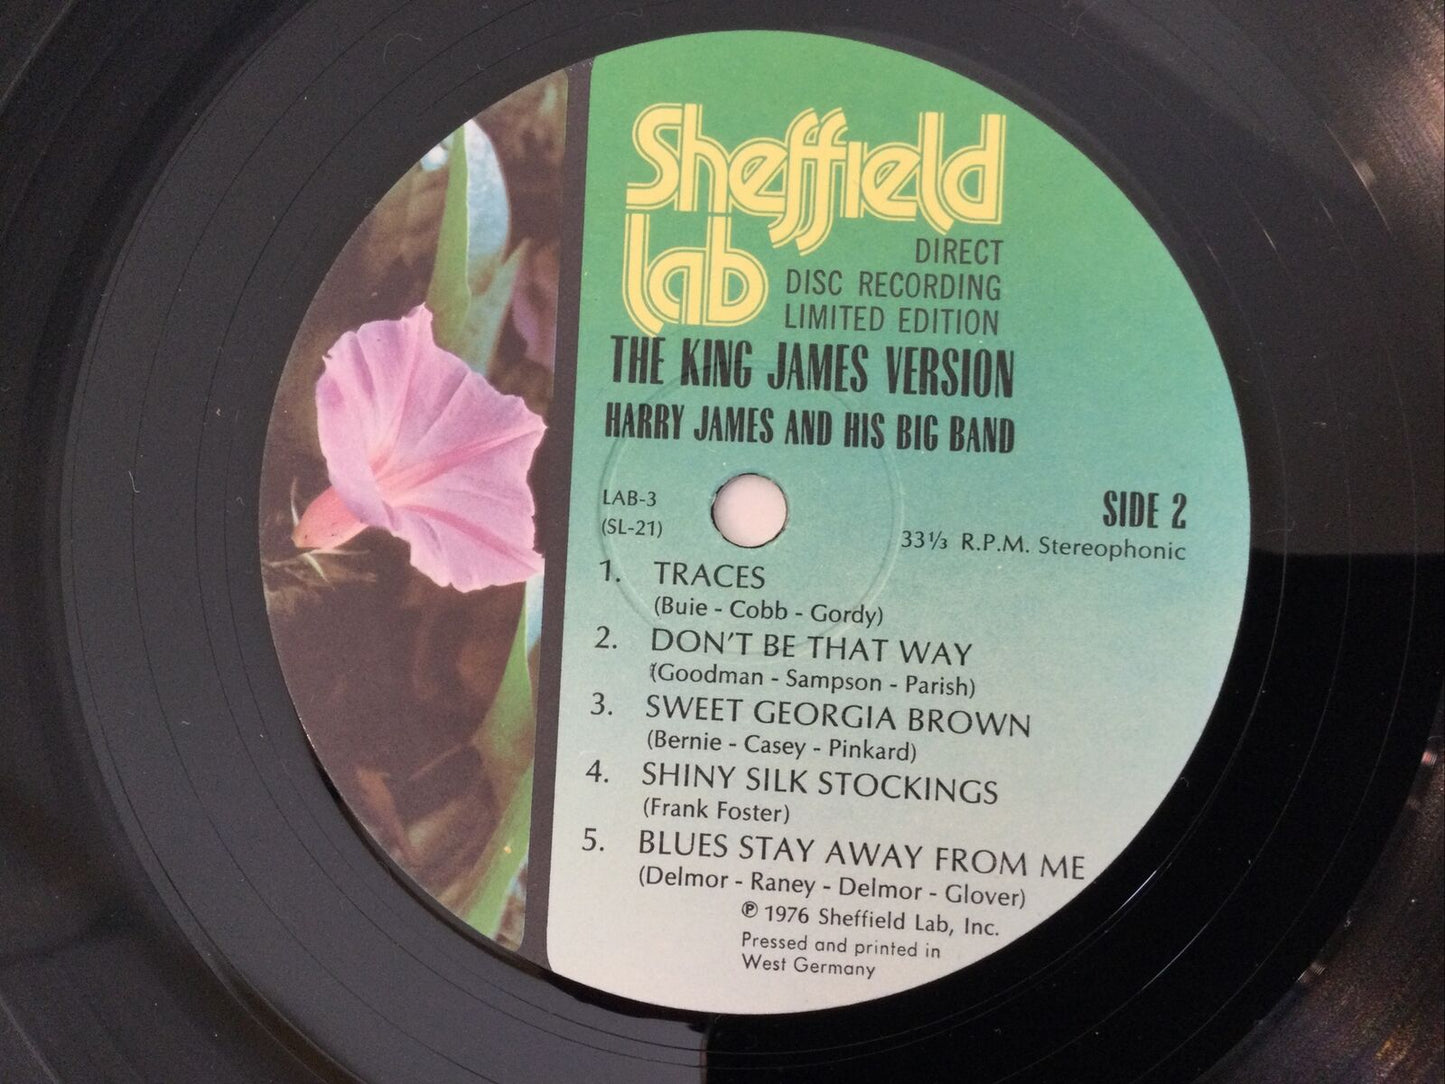 Harry James & His Big Band The King James Version LAB-3 Direct Disc Lp